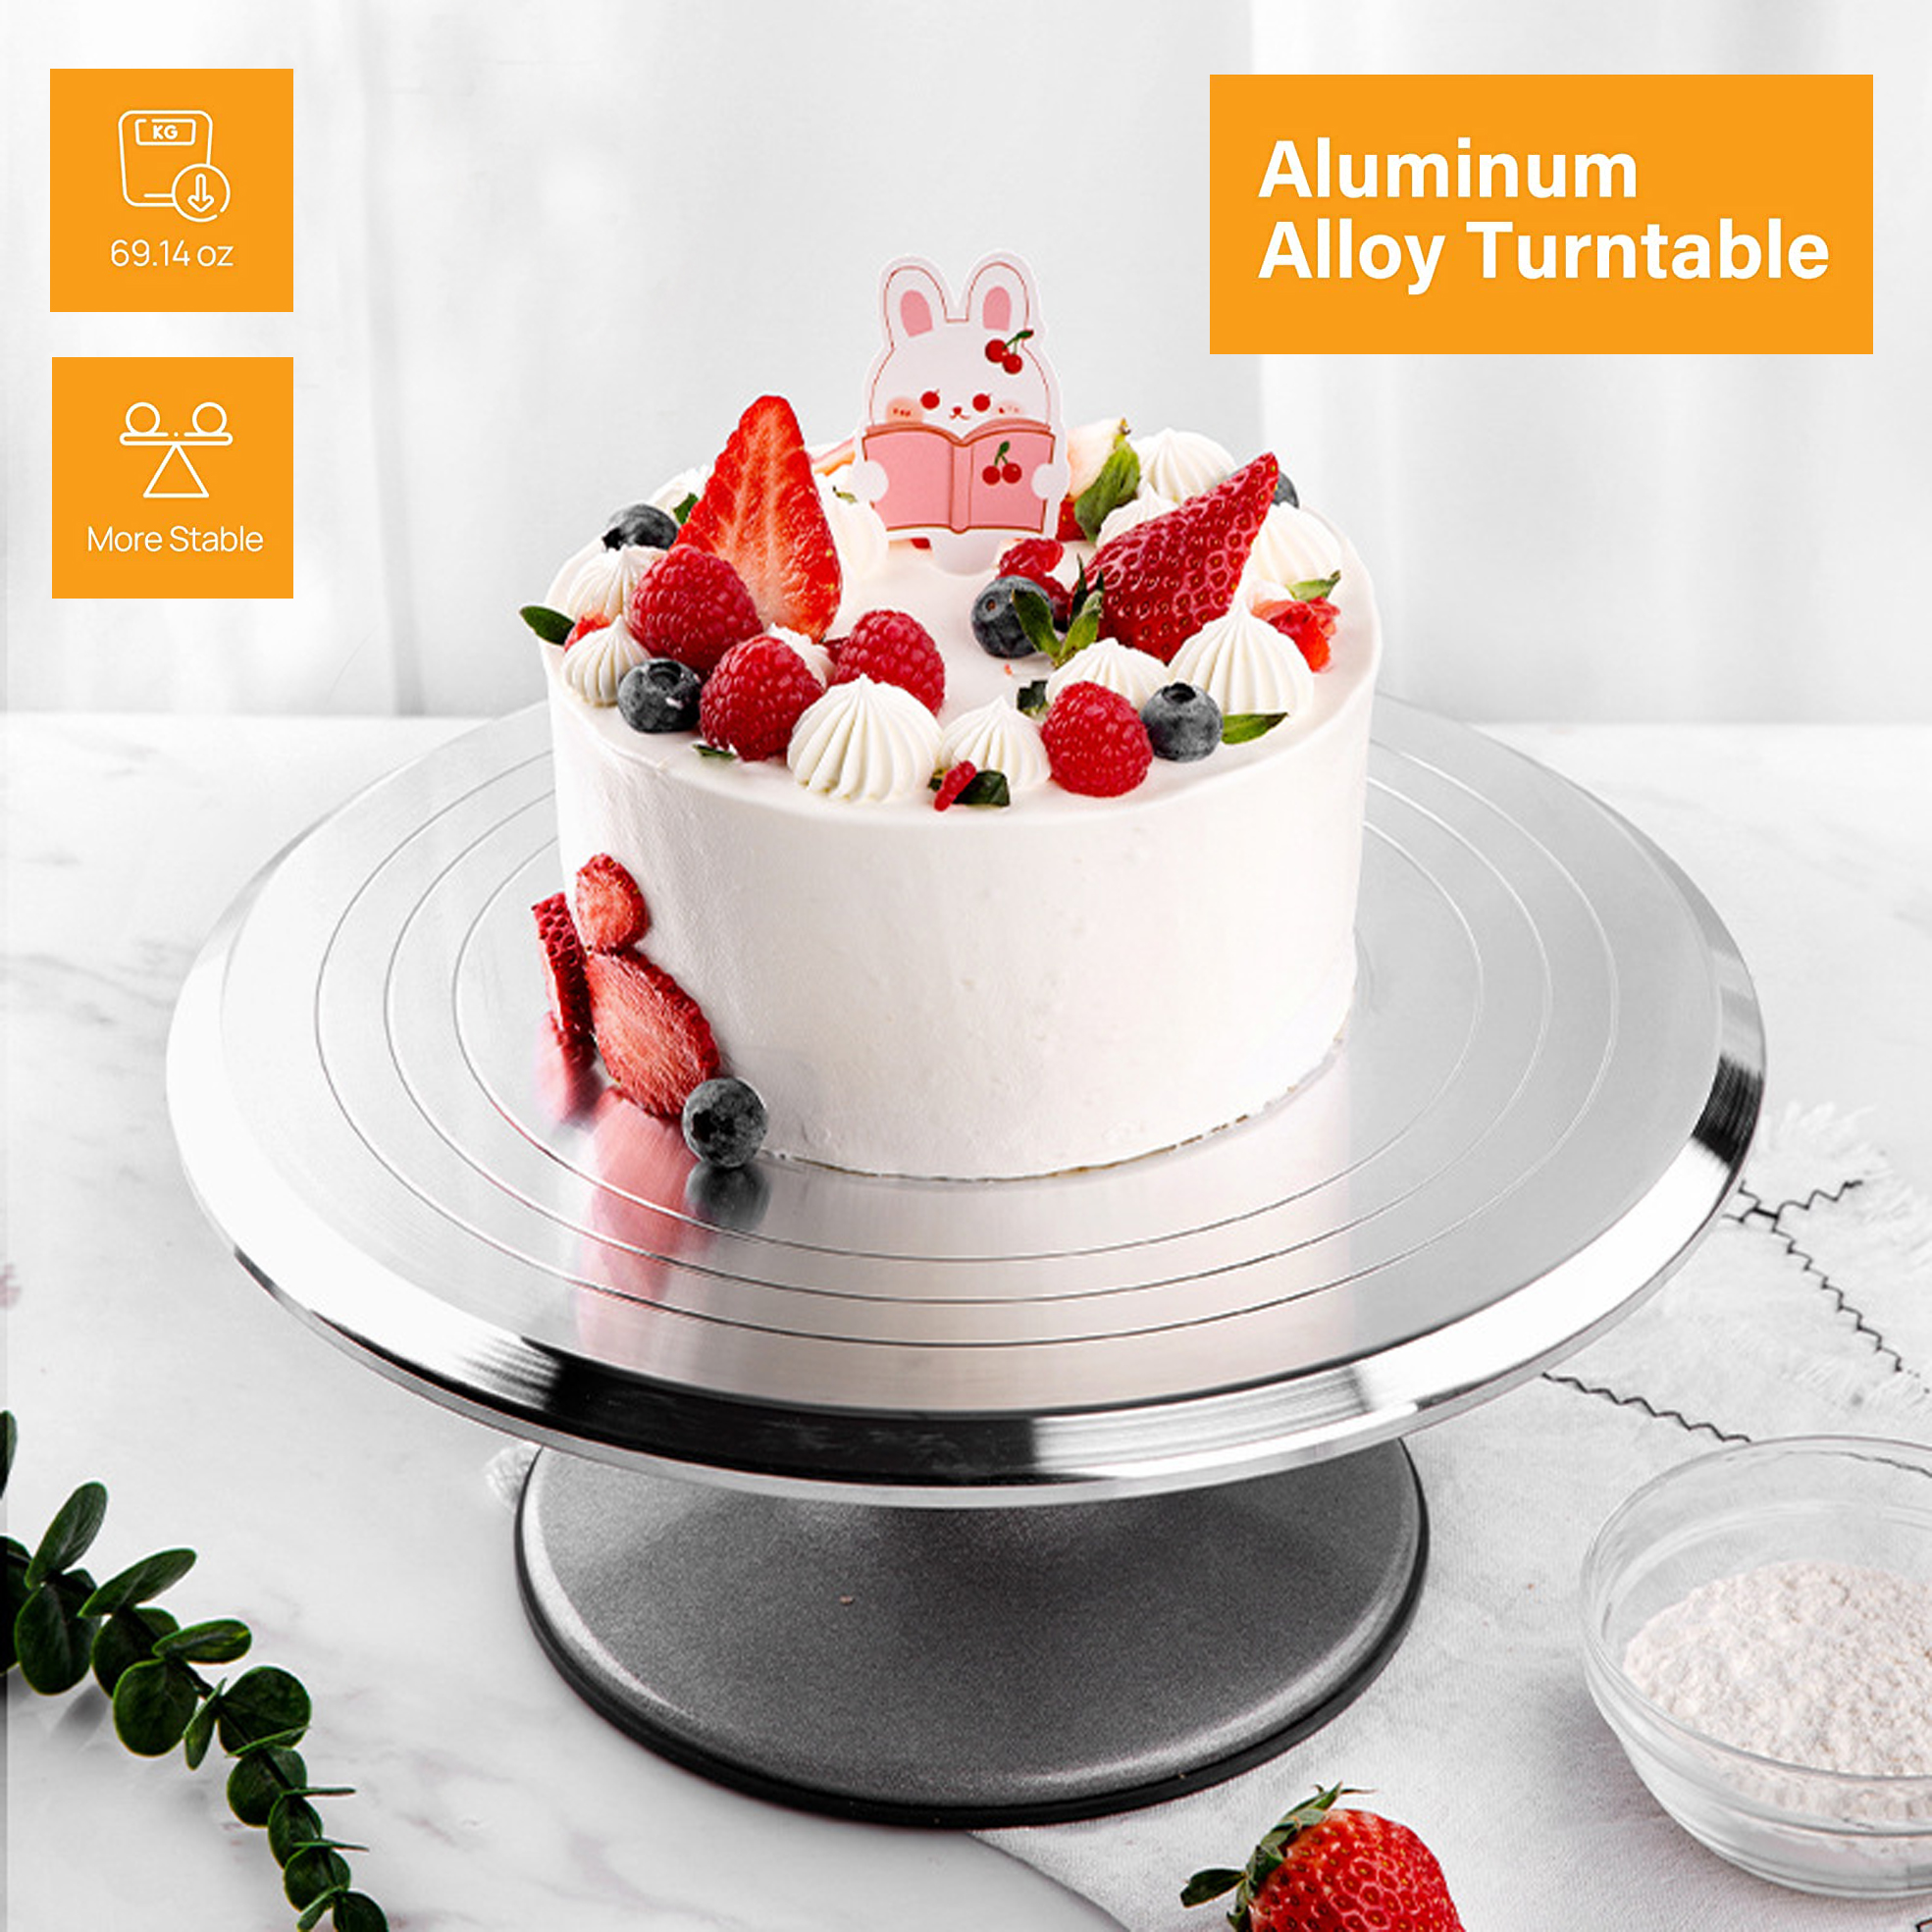 1pc, 28cm Rotating Cake Turntable, Turns Smoothly Revolving Cake Stand Cake  Decorating Kit Display Stand Baking Tools Accessories Supplies For Cookies  Cupcake